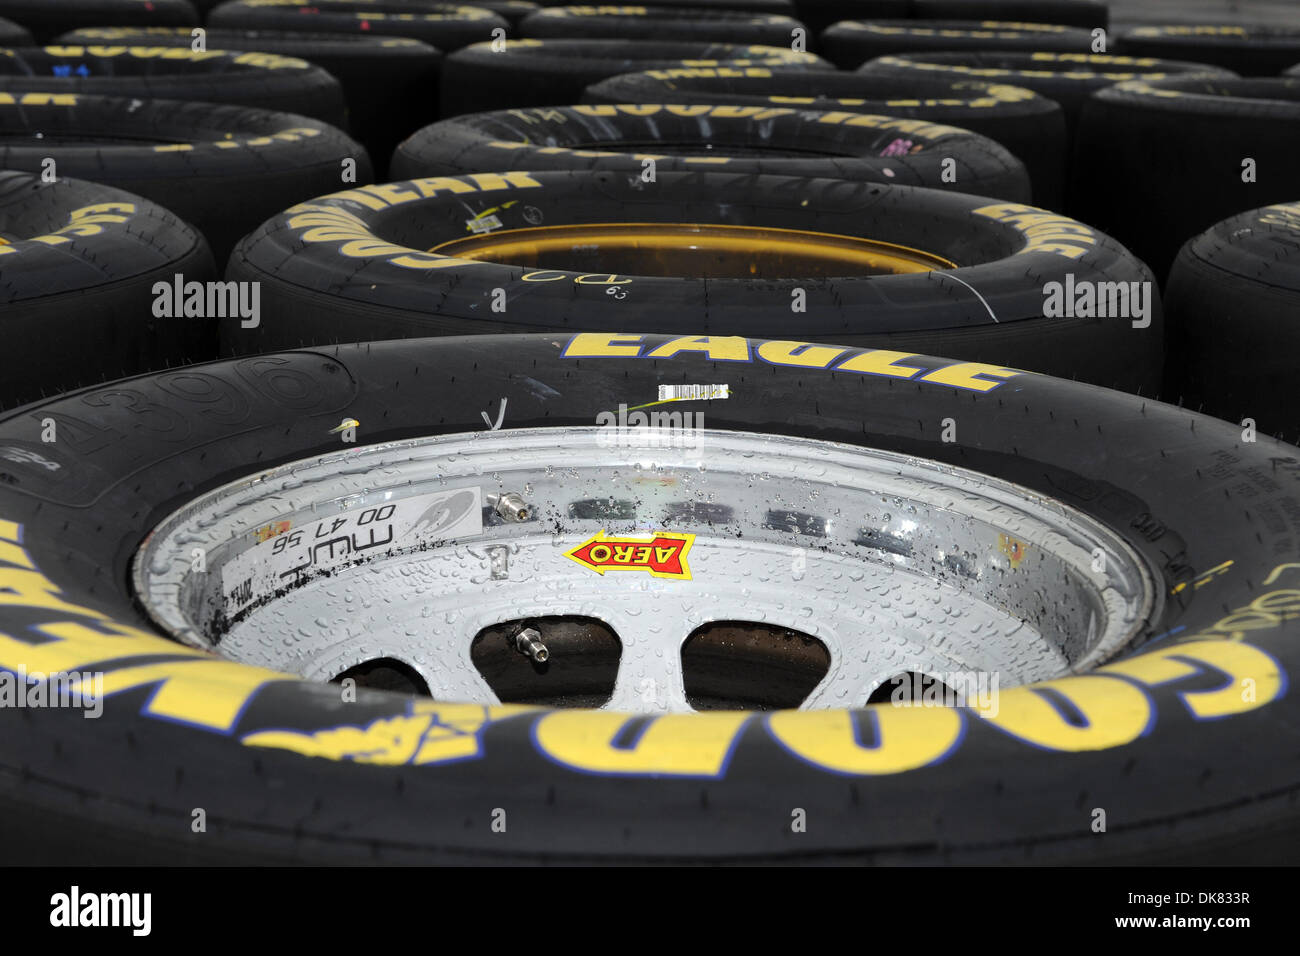 July 8, 2011 - Sparta, Kentucky, U.S - Goodyear tires sit in stacks covered in rain for the Feed The Children 300 at the Kentucky Speedway in Sparta, Kentucky. Rain came through in the morning washing out practice. (Credit Image: © Michael Johnson/Southcreek Global/ZUMAPRESS.com) Stock Photo